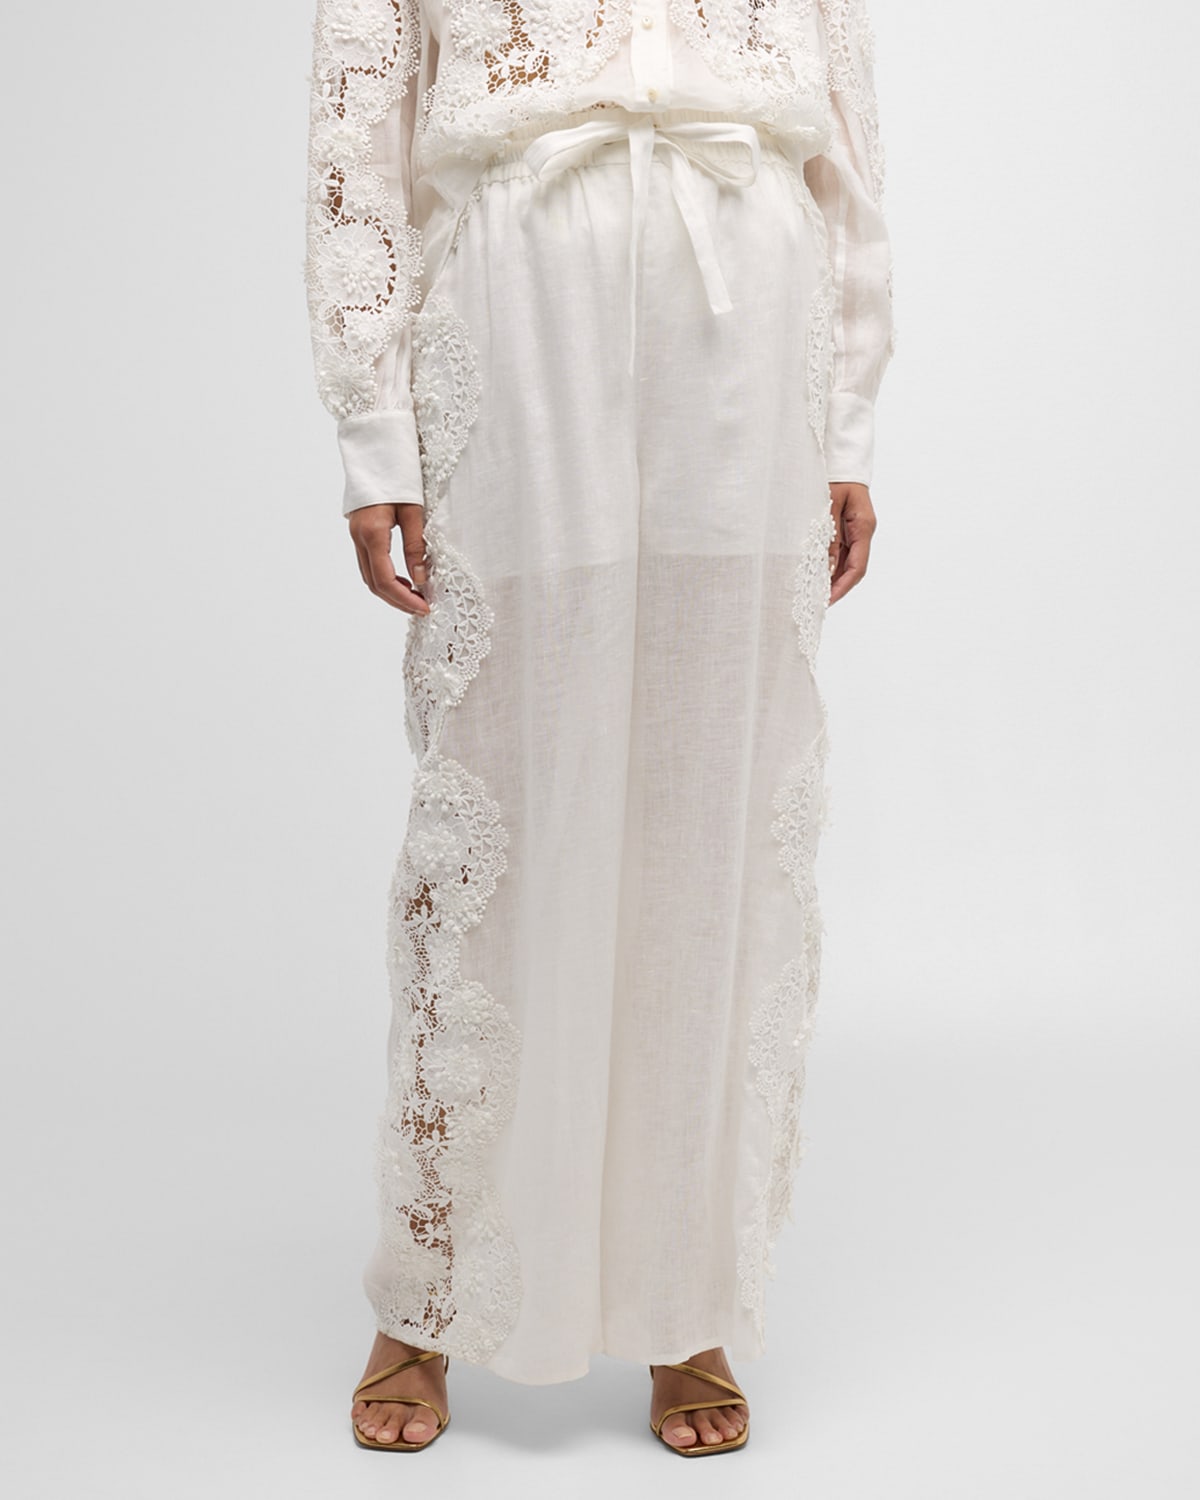 Zimmermann Halliday Lace Flower Pants In White